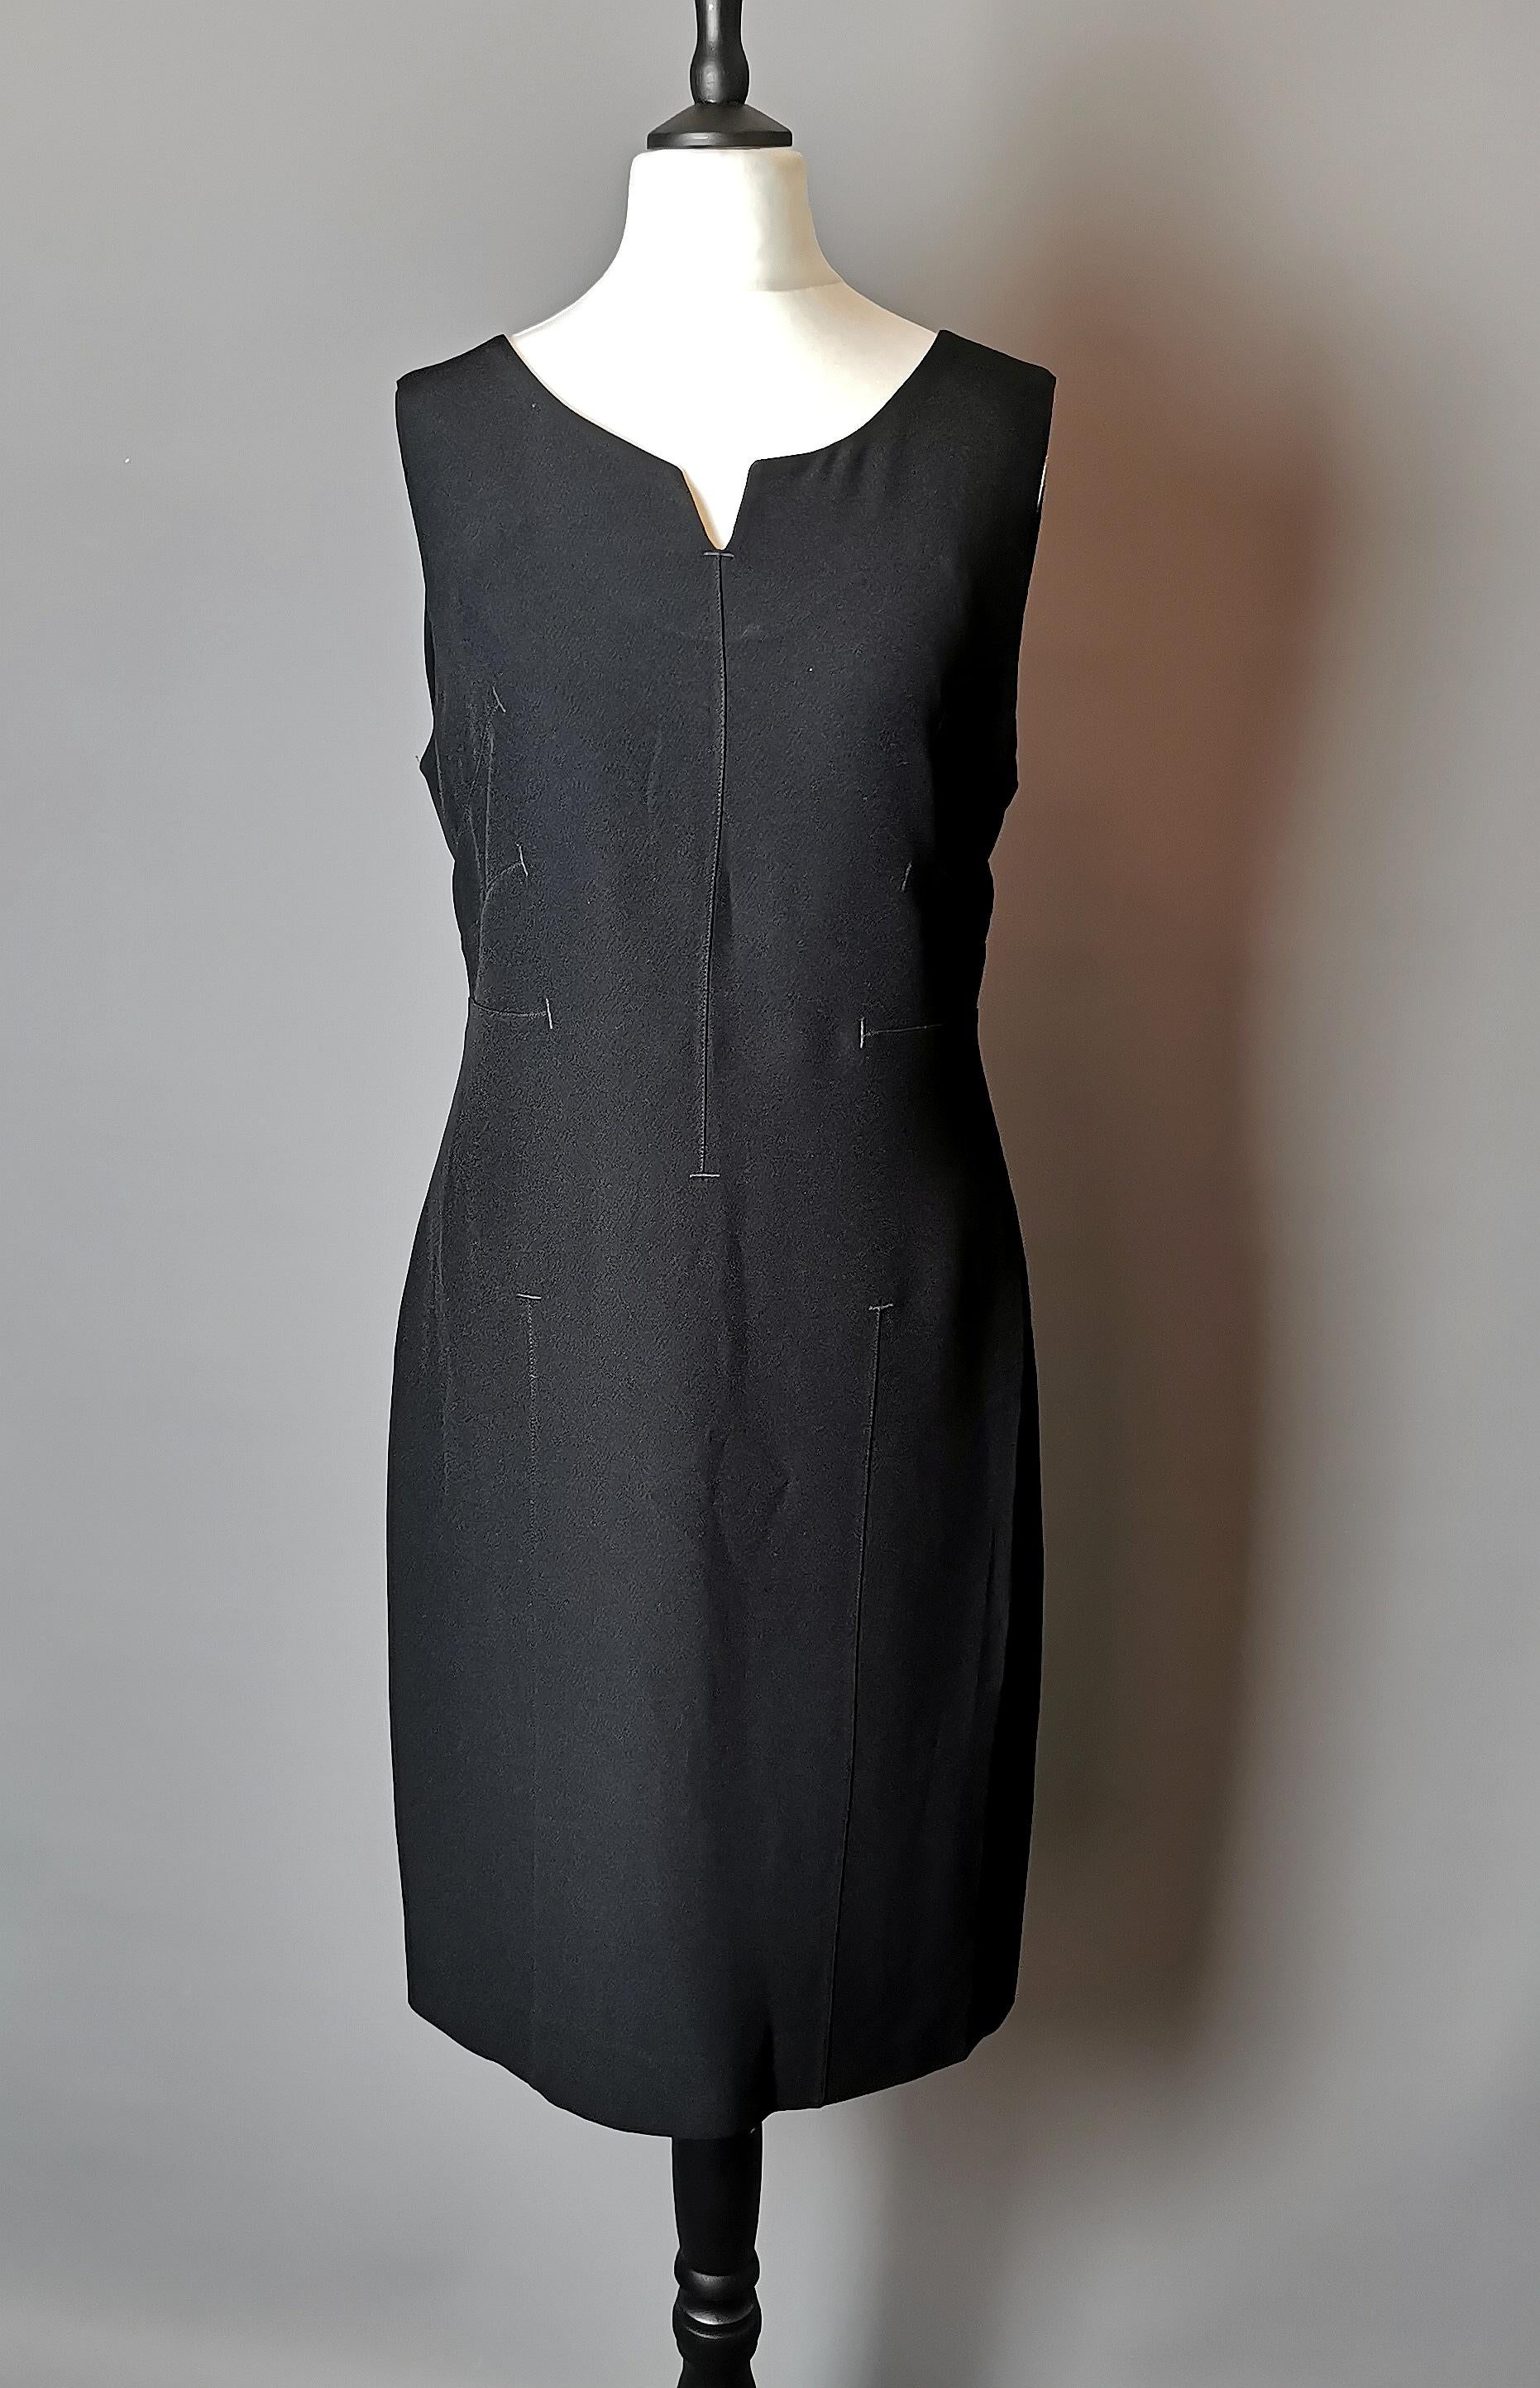 A gorgeous vintage c2000s Moschino Cheap and Chic sheath dress.

It has a simple sheath silhouette with stitch detailing to the body and bust, this gives the dress an interesting twist.

Perfect for the office it day to night wear, easily dressed up